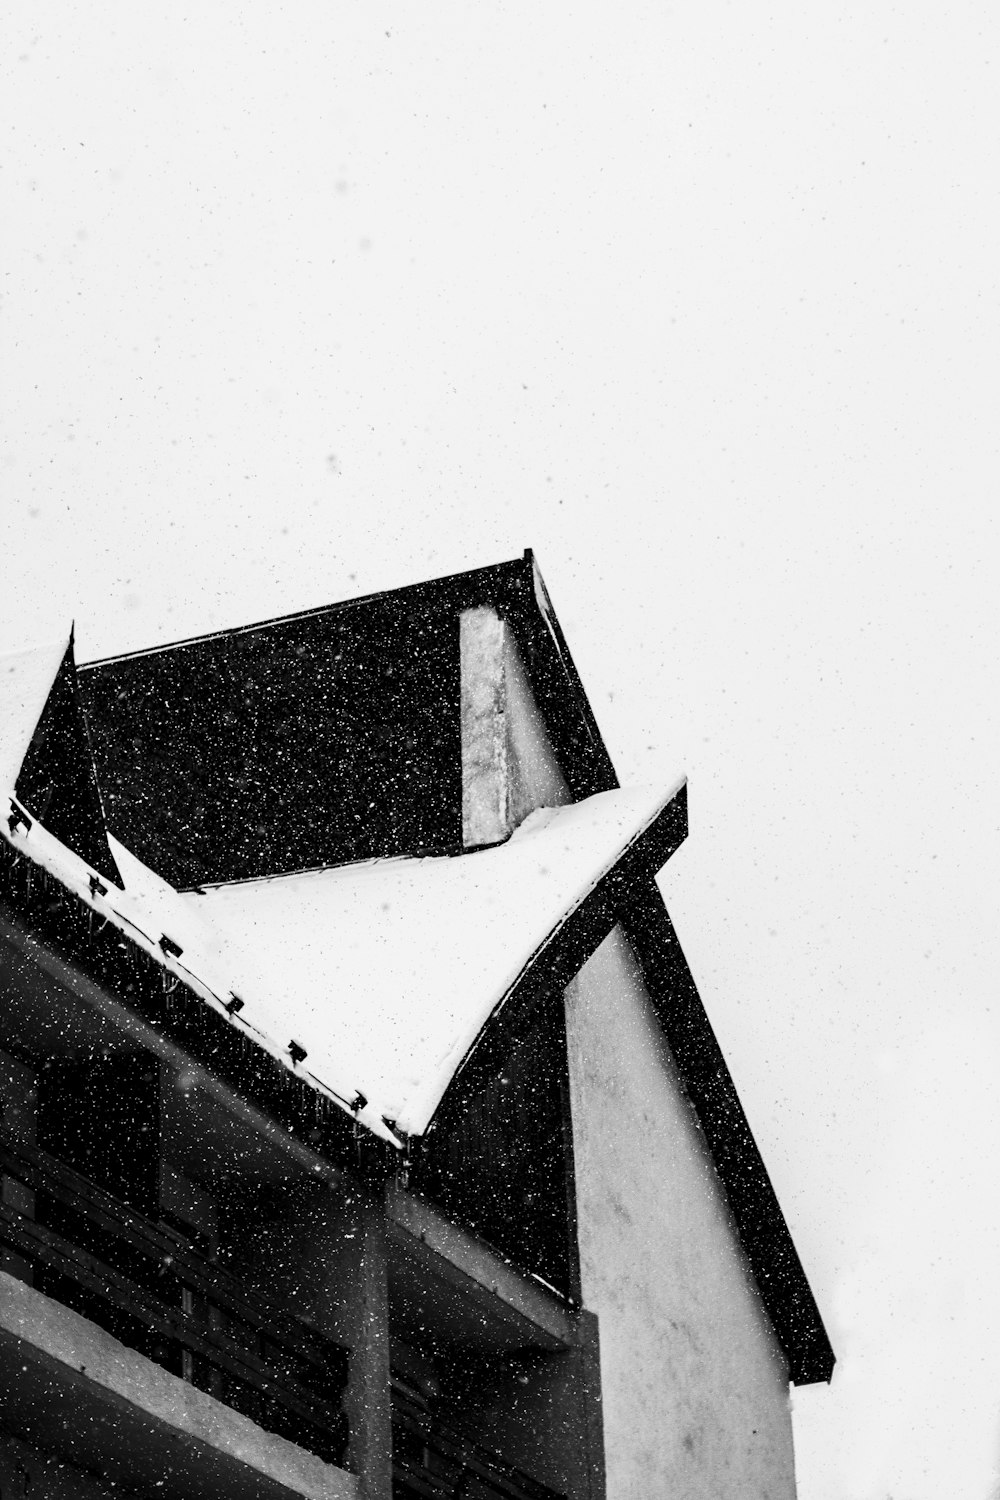 a black and white photo of a building with snow on the roof